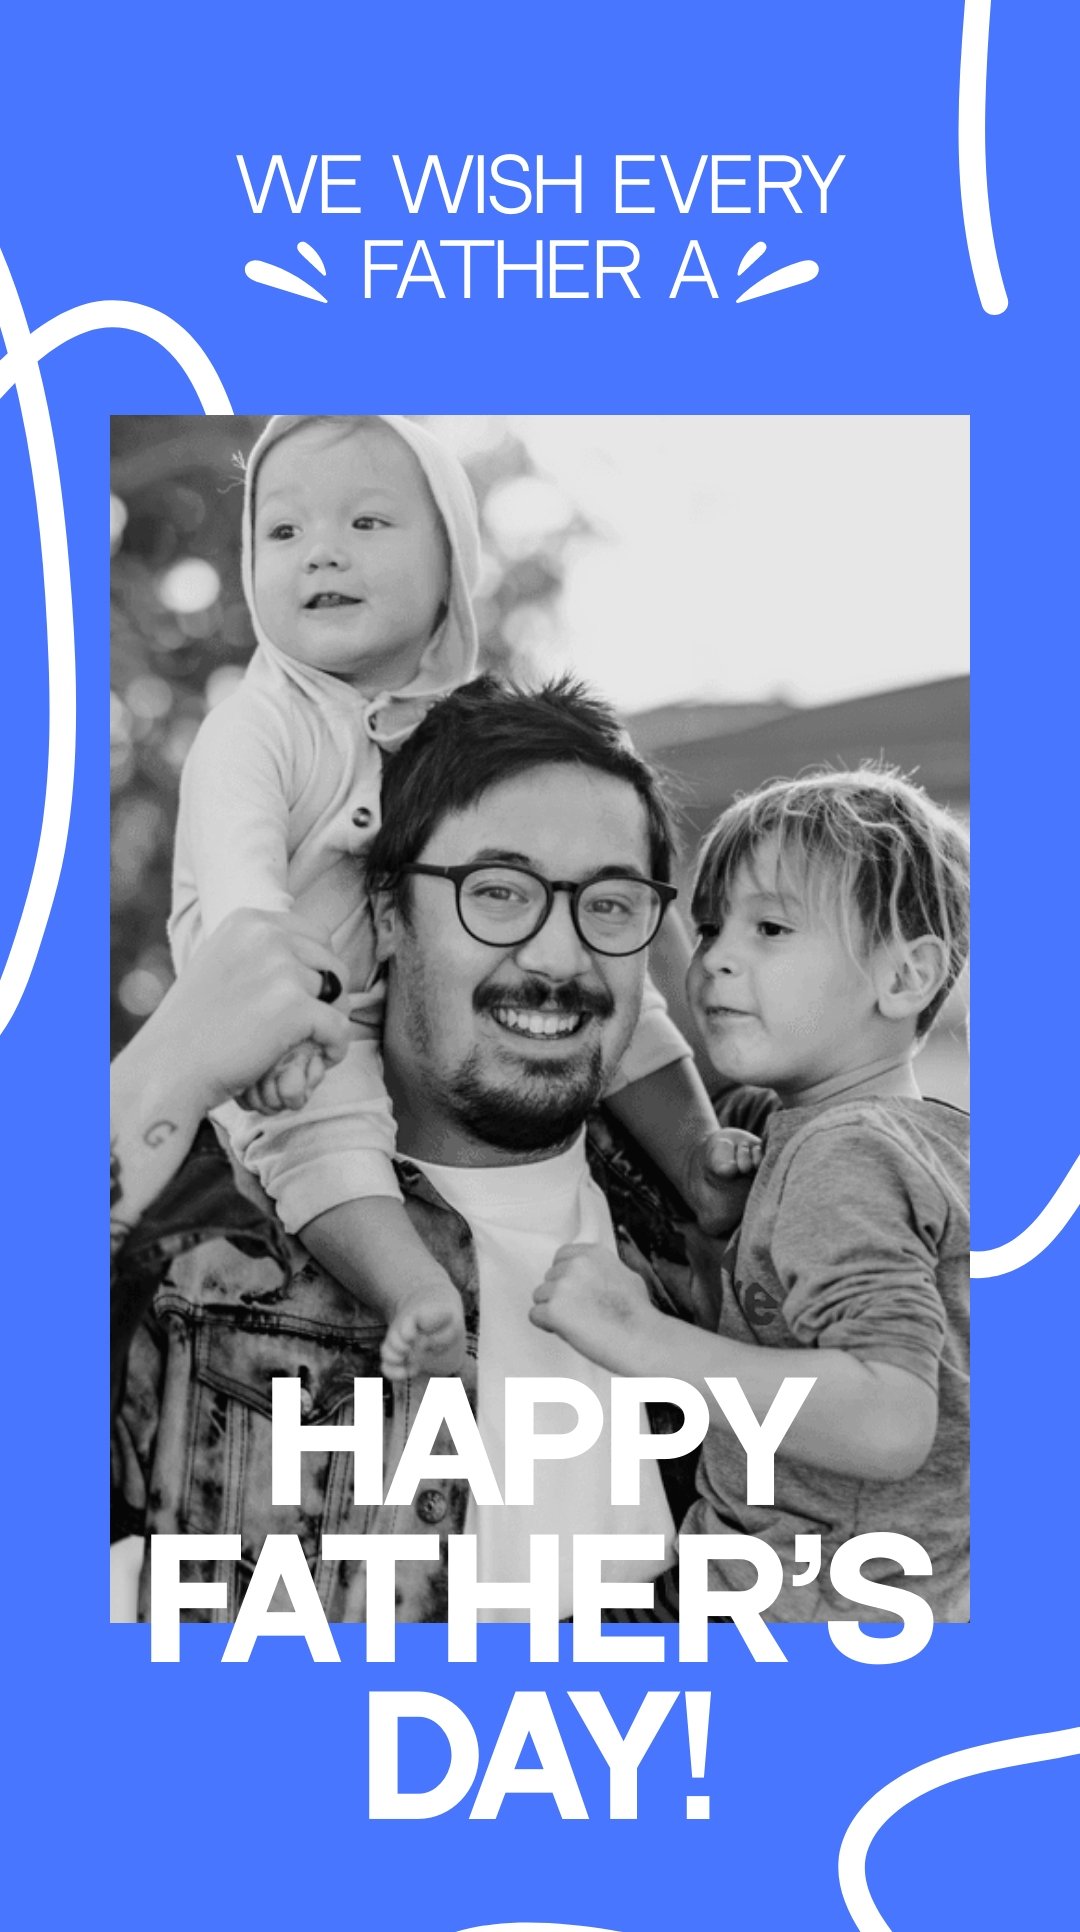 Father's Day Wishes Whatsapp Status Template